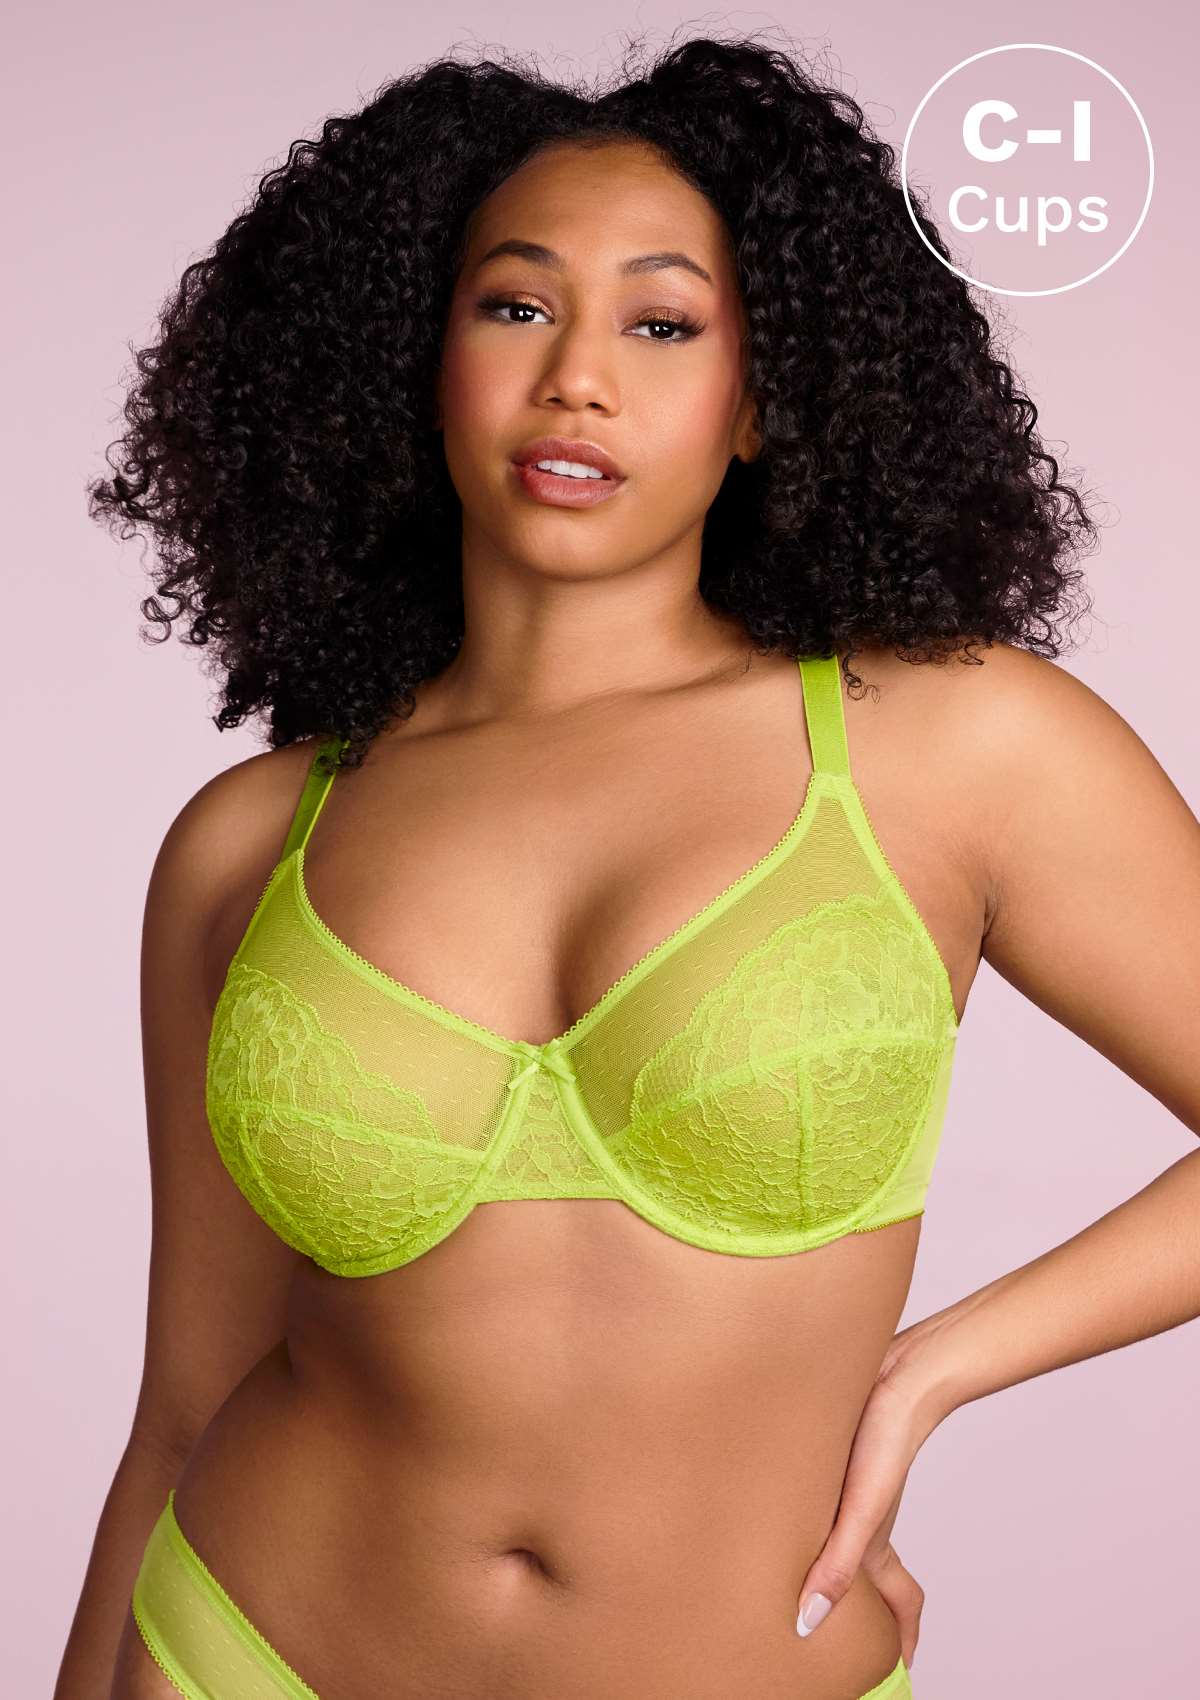 HSIA Enchante Full Cup Minimizing Bra: Supportive Unlined Lace Bra - Lime Green / 36 / DDD/F